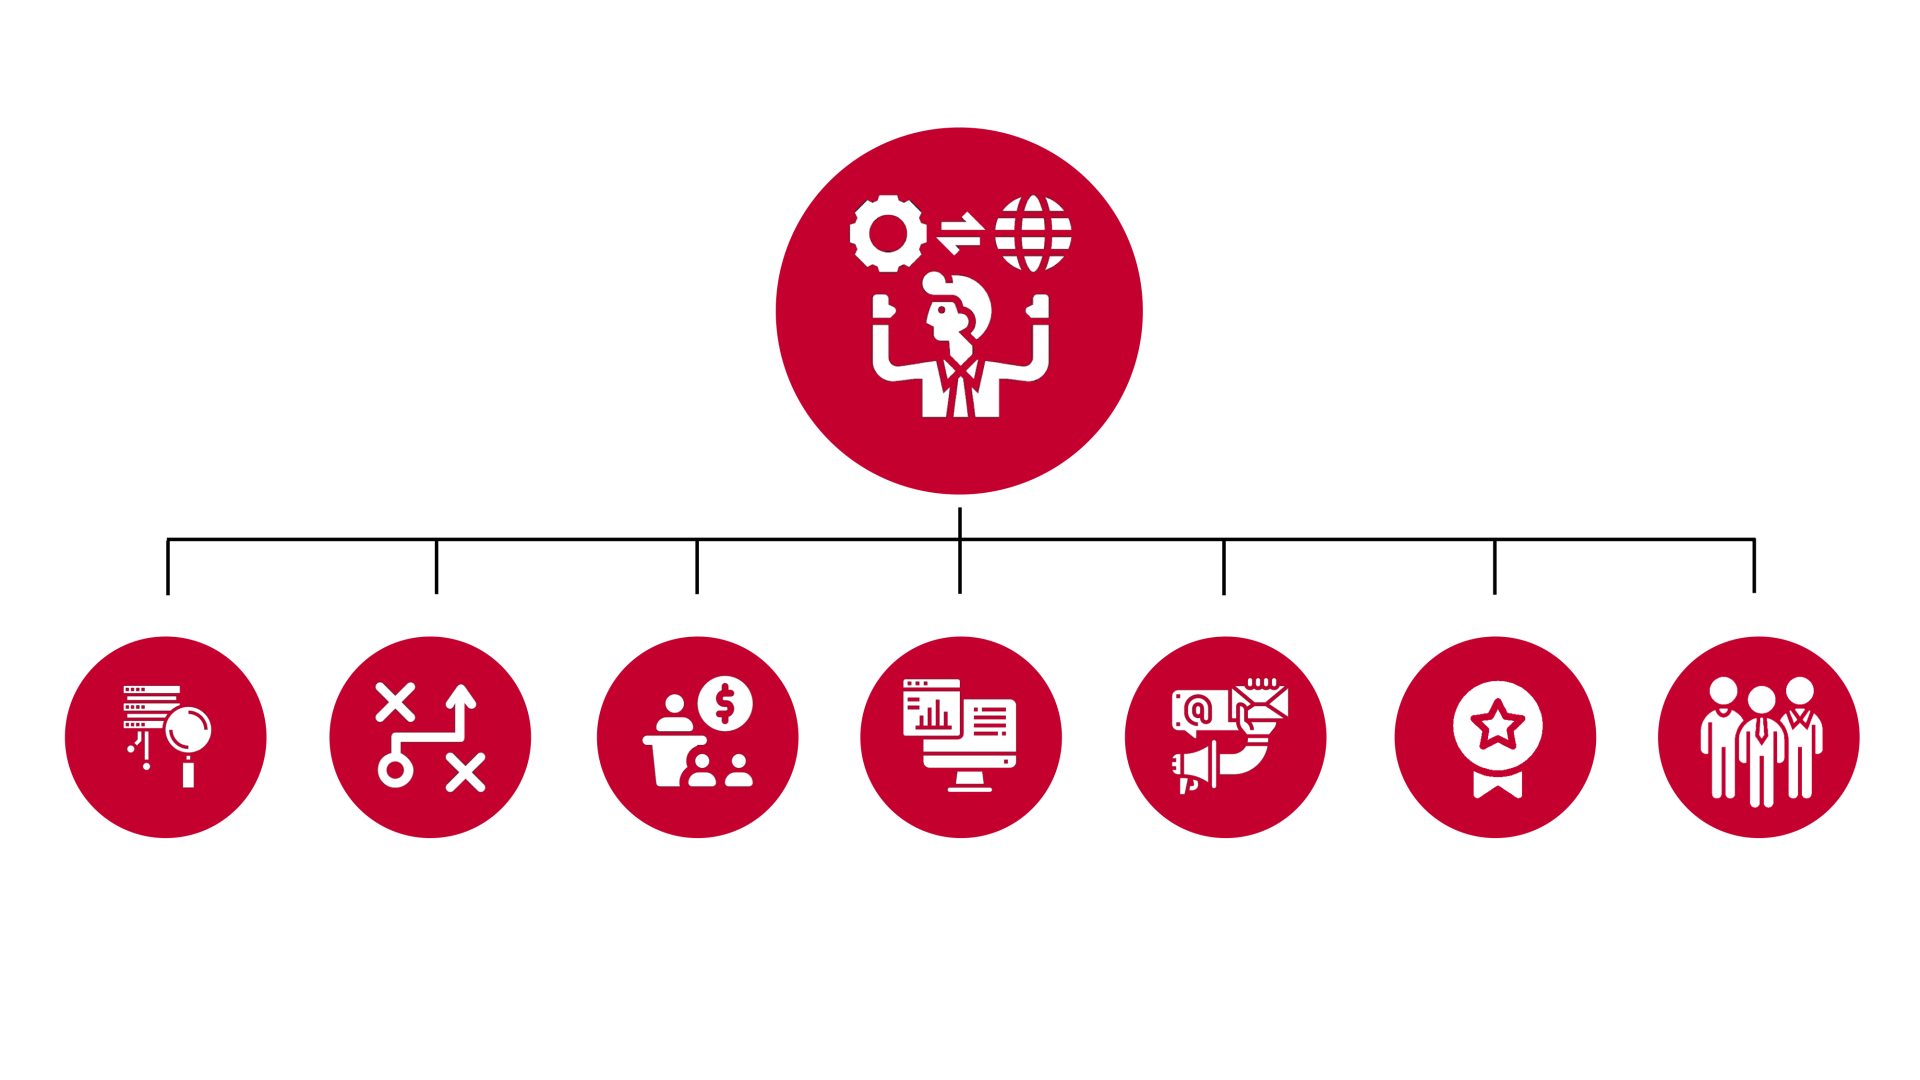 A diagram of a company with a red circle in the middle surrounded by white icons.